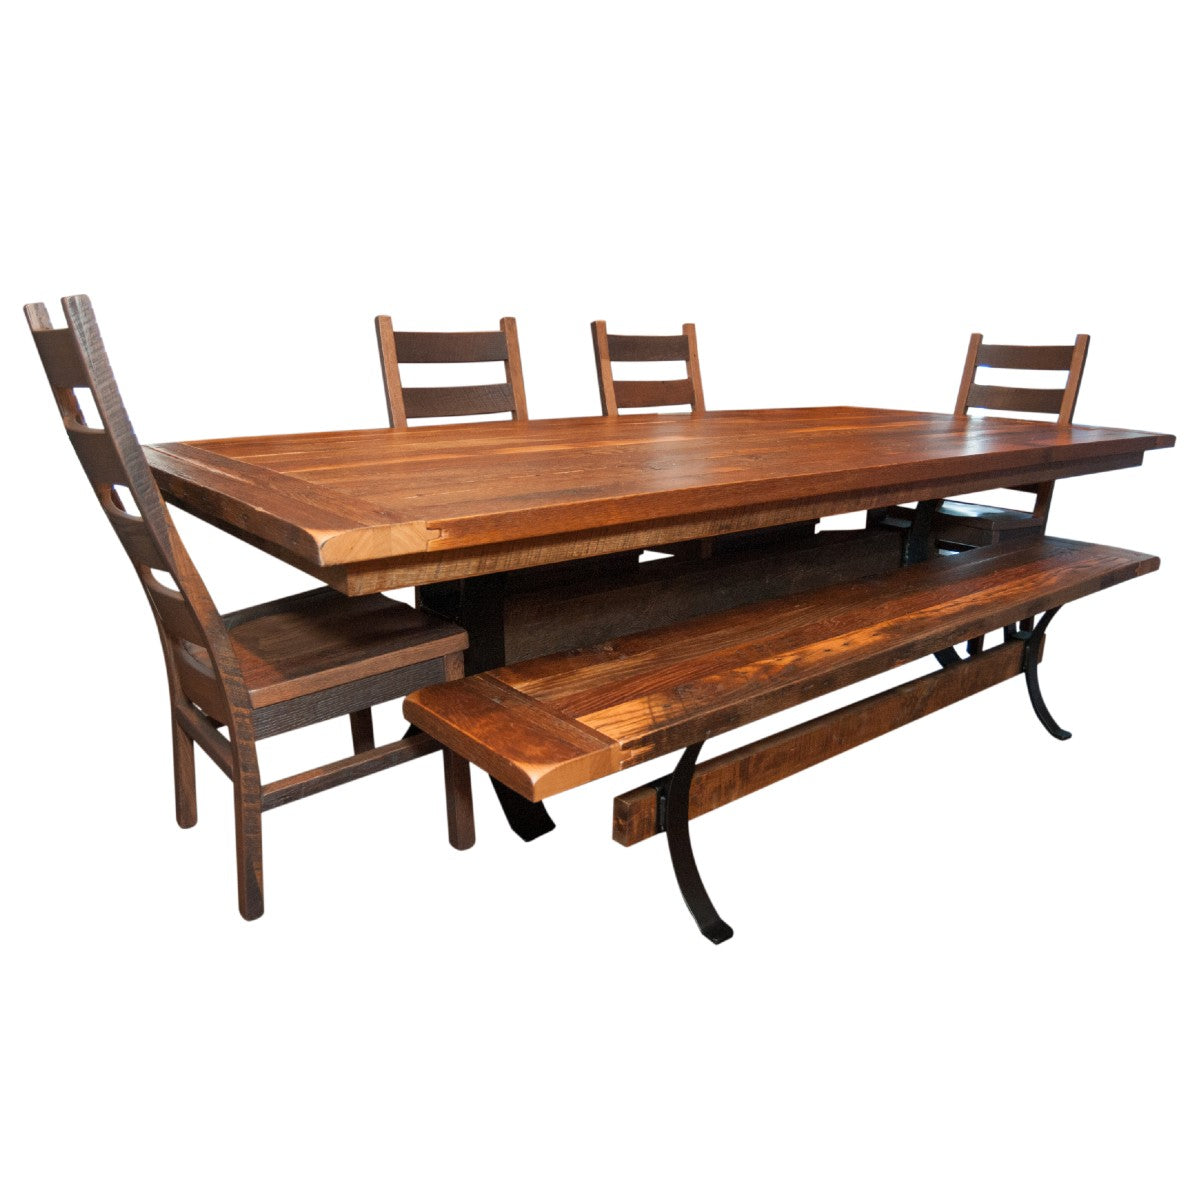 Rustic and Industrial Bench and Dining Table